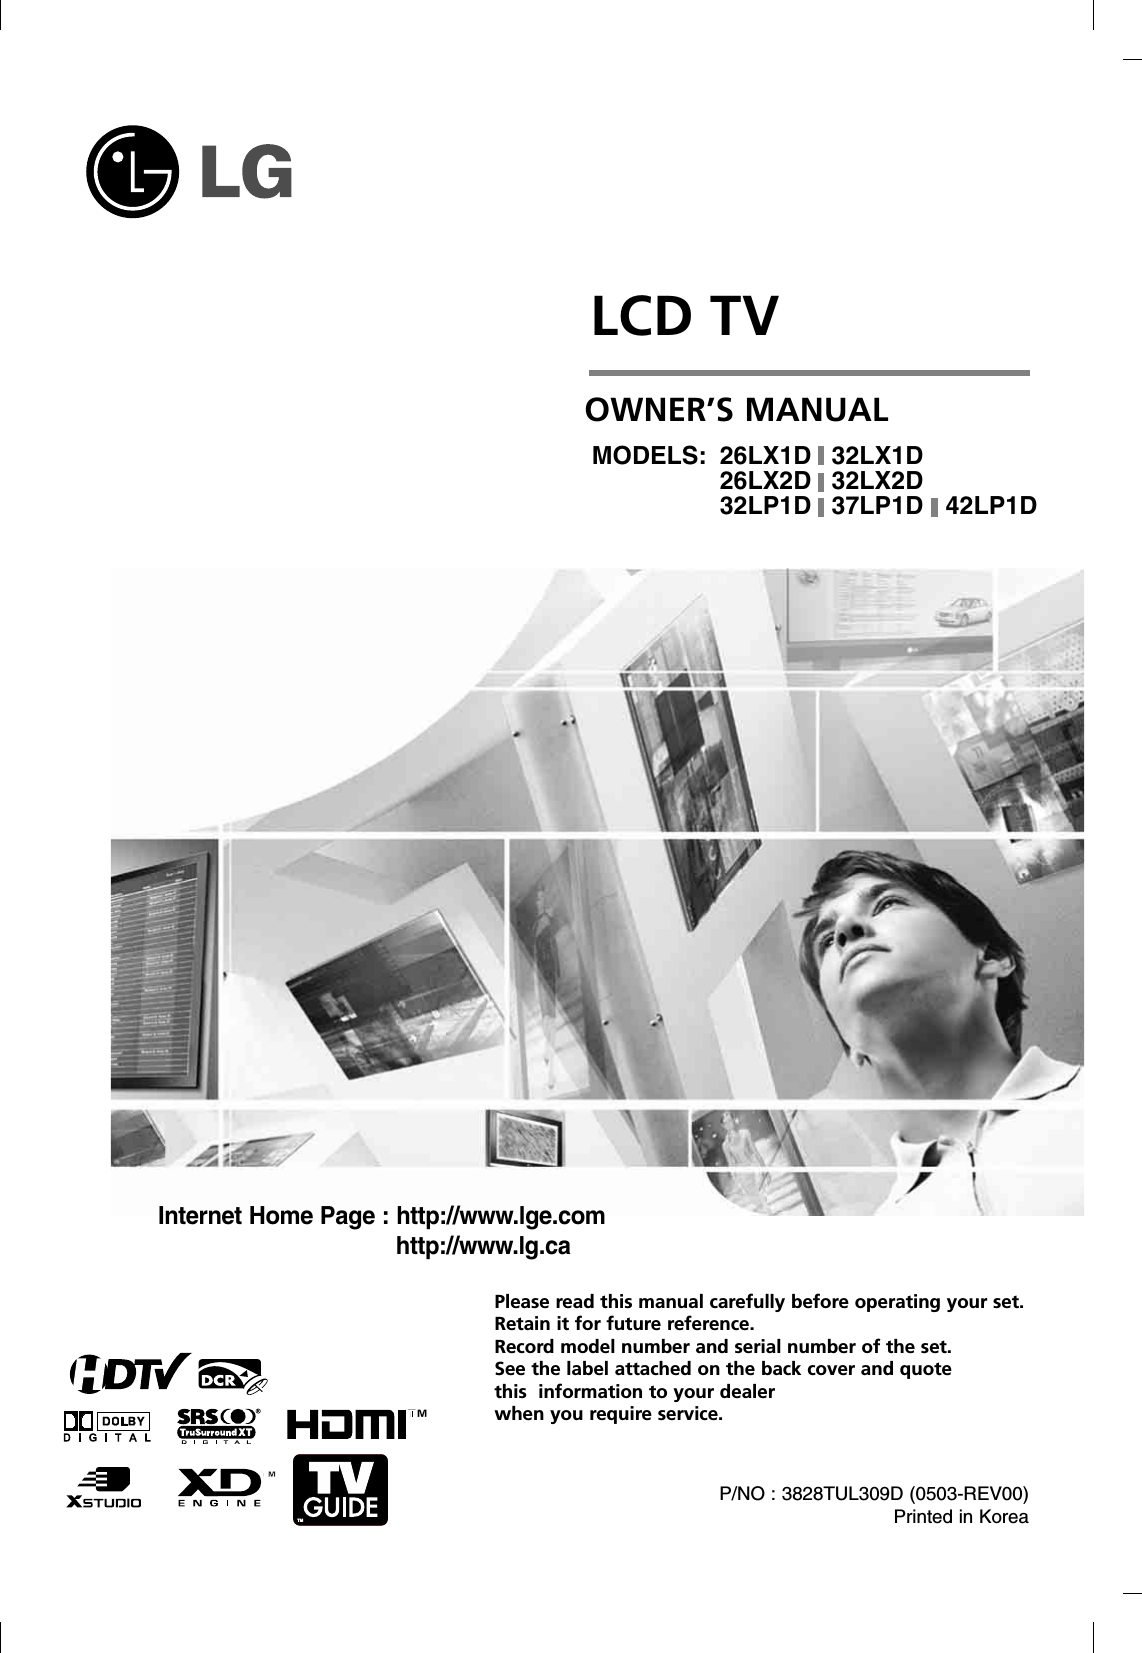 LCD TVPlease read this manual carefully before operating your set. Retain it for future reference.Record model number and serial number of the set. See the label attached on the back cover and quote this  information to your dealer when you require service.P/NO : 3828TUL309D (0503-REV00)Printed in KoreaOWNER’S MANUALMODELS: 26LX1D 32LX1D26LX2D 32LX2D32LP1D 37LP1D 42LP1DInternet Home Page : http://www.lge.comhttp://www.lg.caTM